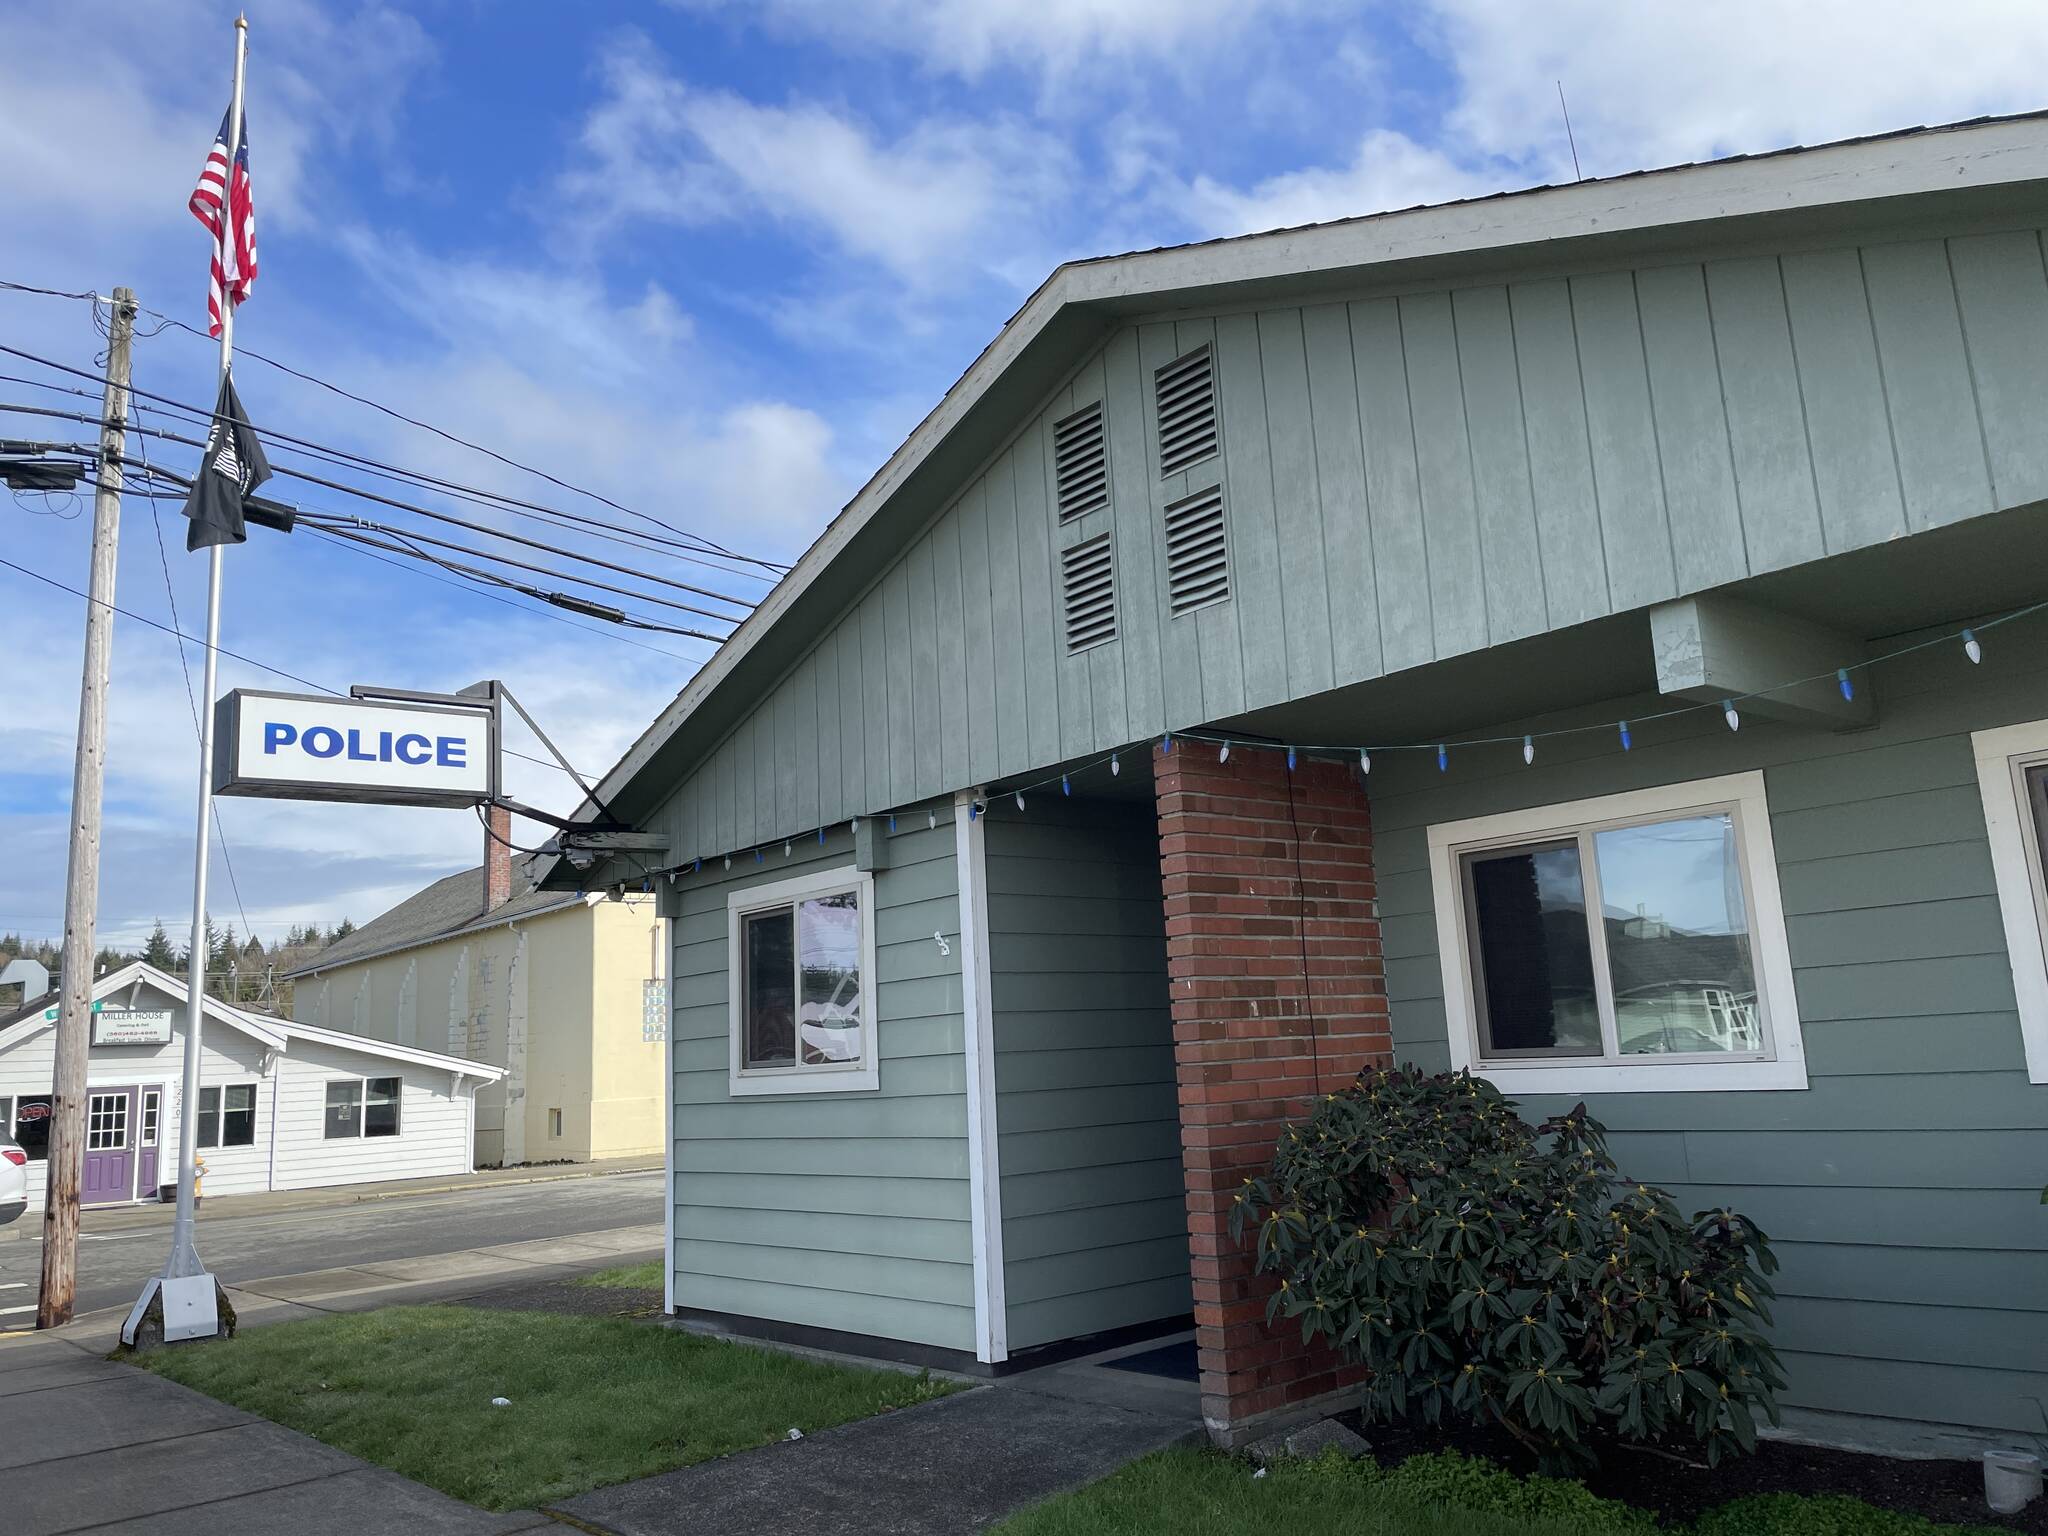 Elma voters will see a ballot measure to approve an annual levy to fund the staffing of the police department on Aug. 1. (Michael S. Lockett / The Daily World)